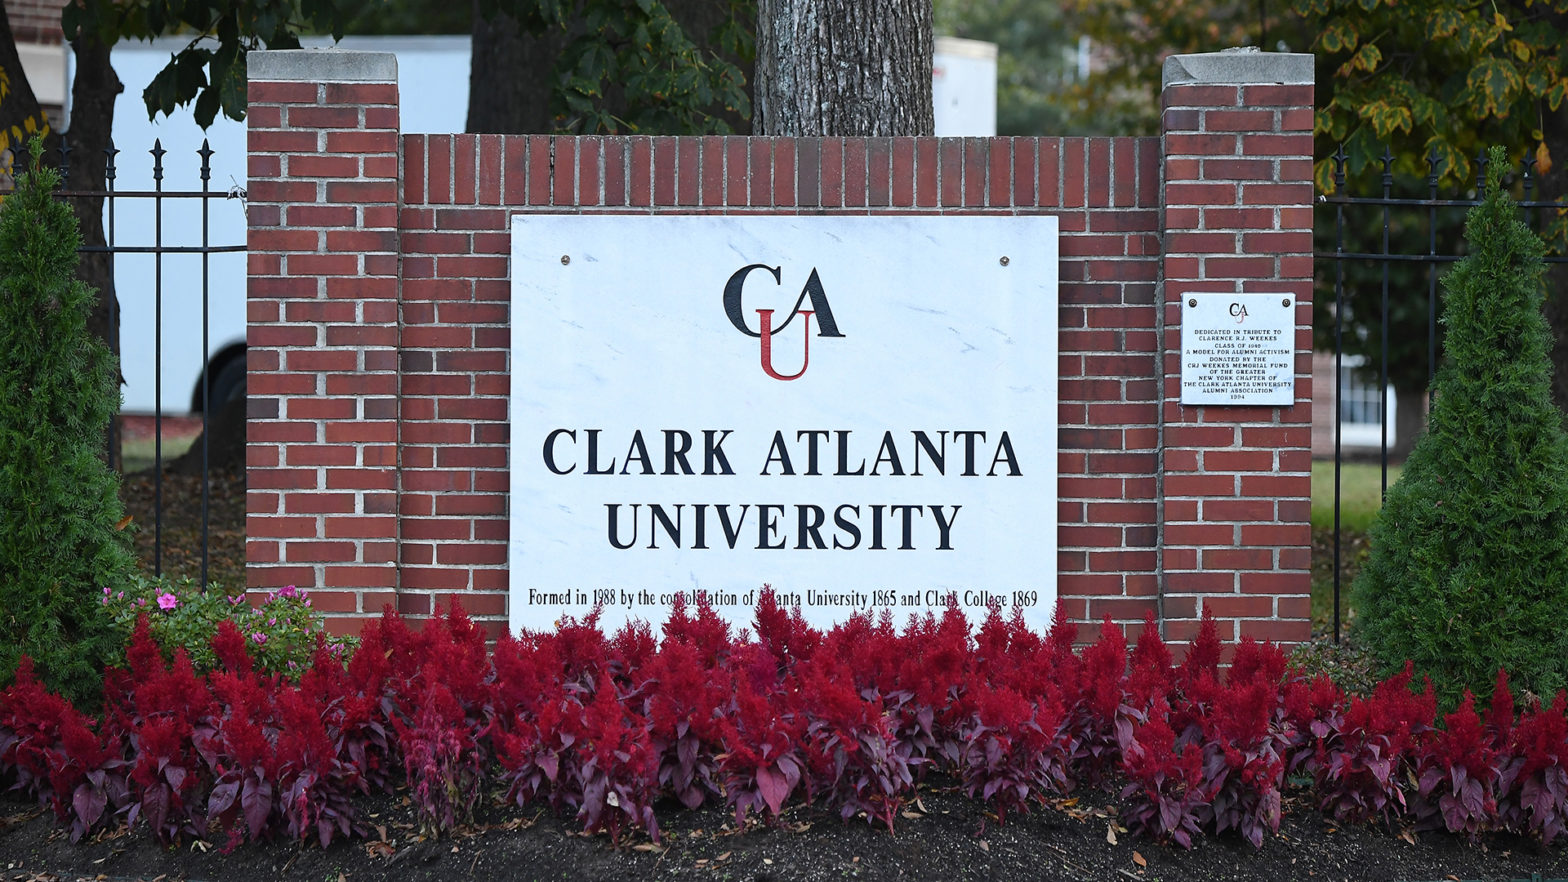 Clark Atlanta University Alumna Carol Waddy Presents The HBCU With A $1M Gift From Chick-Fil-A